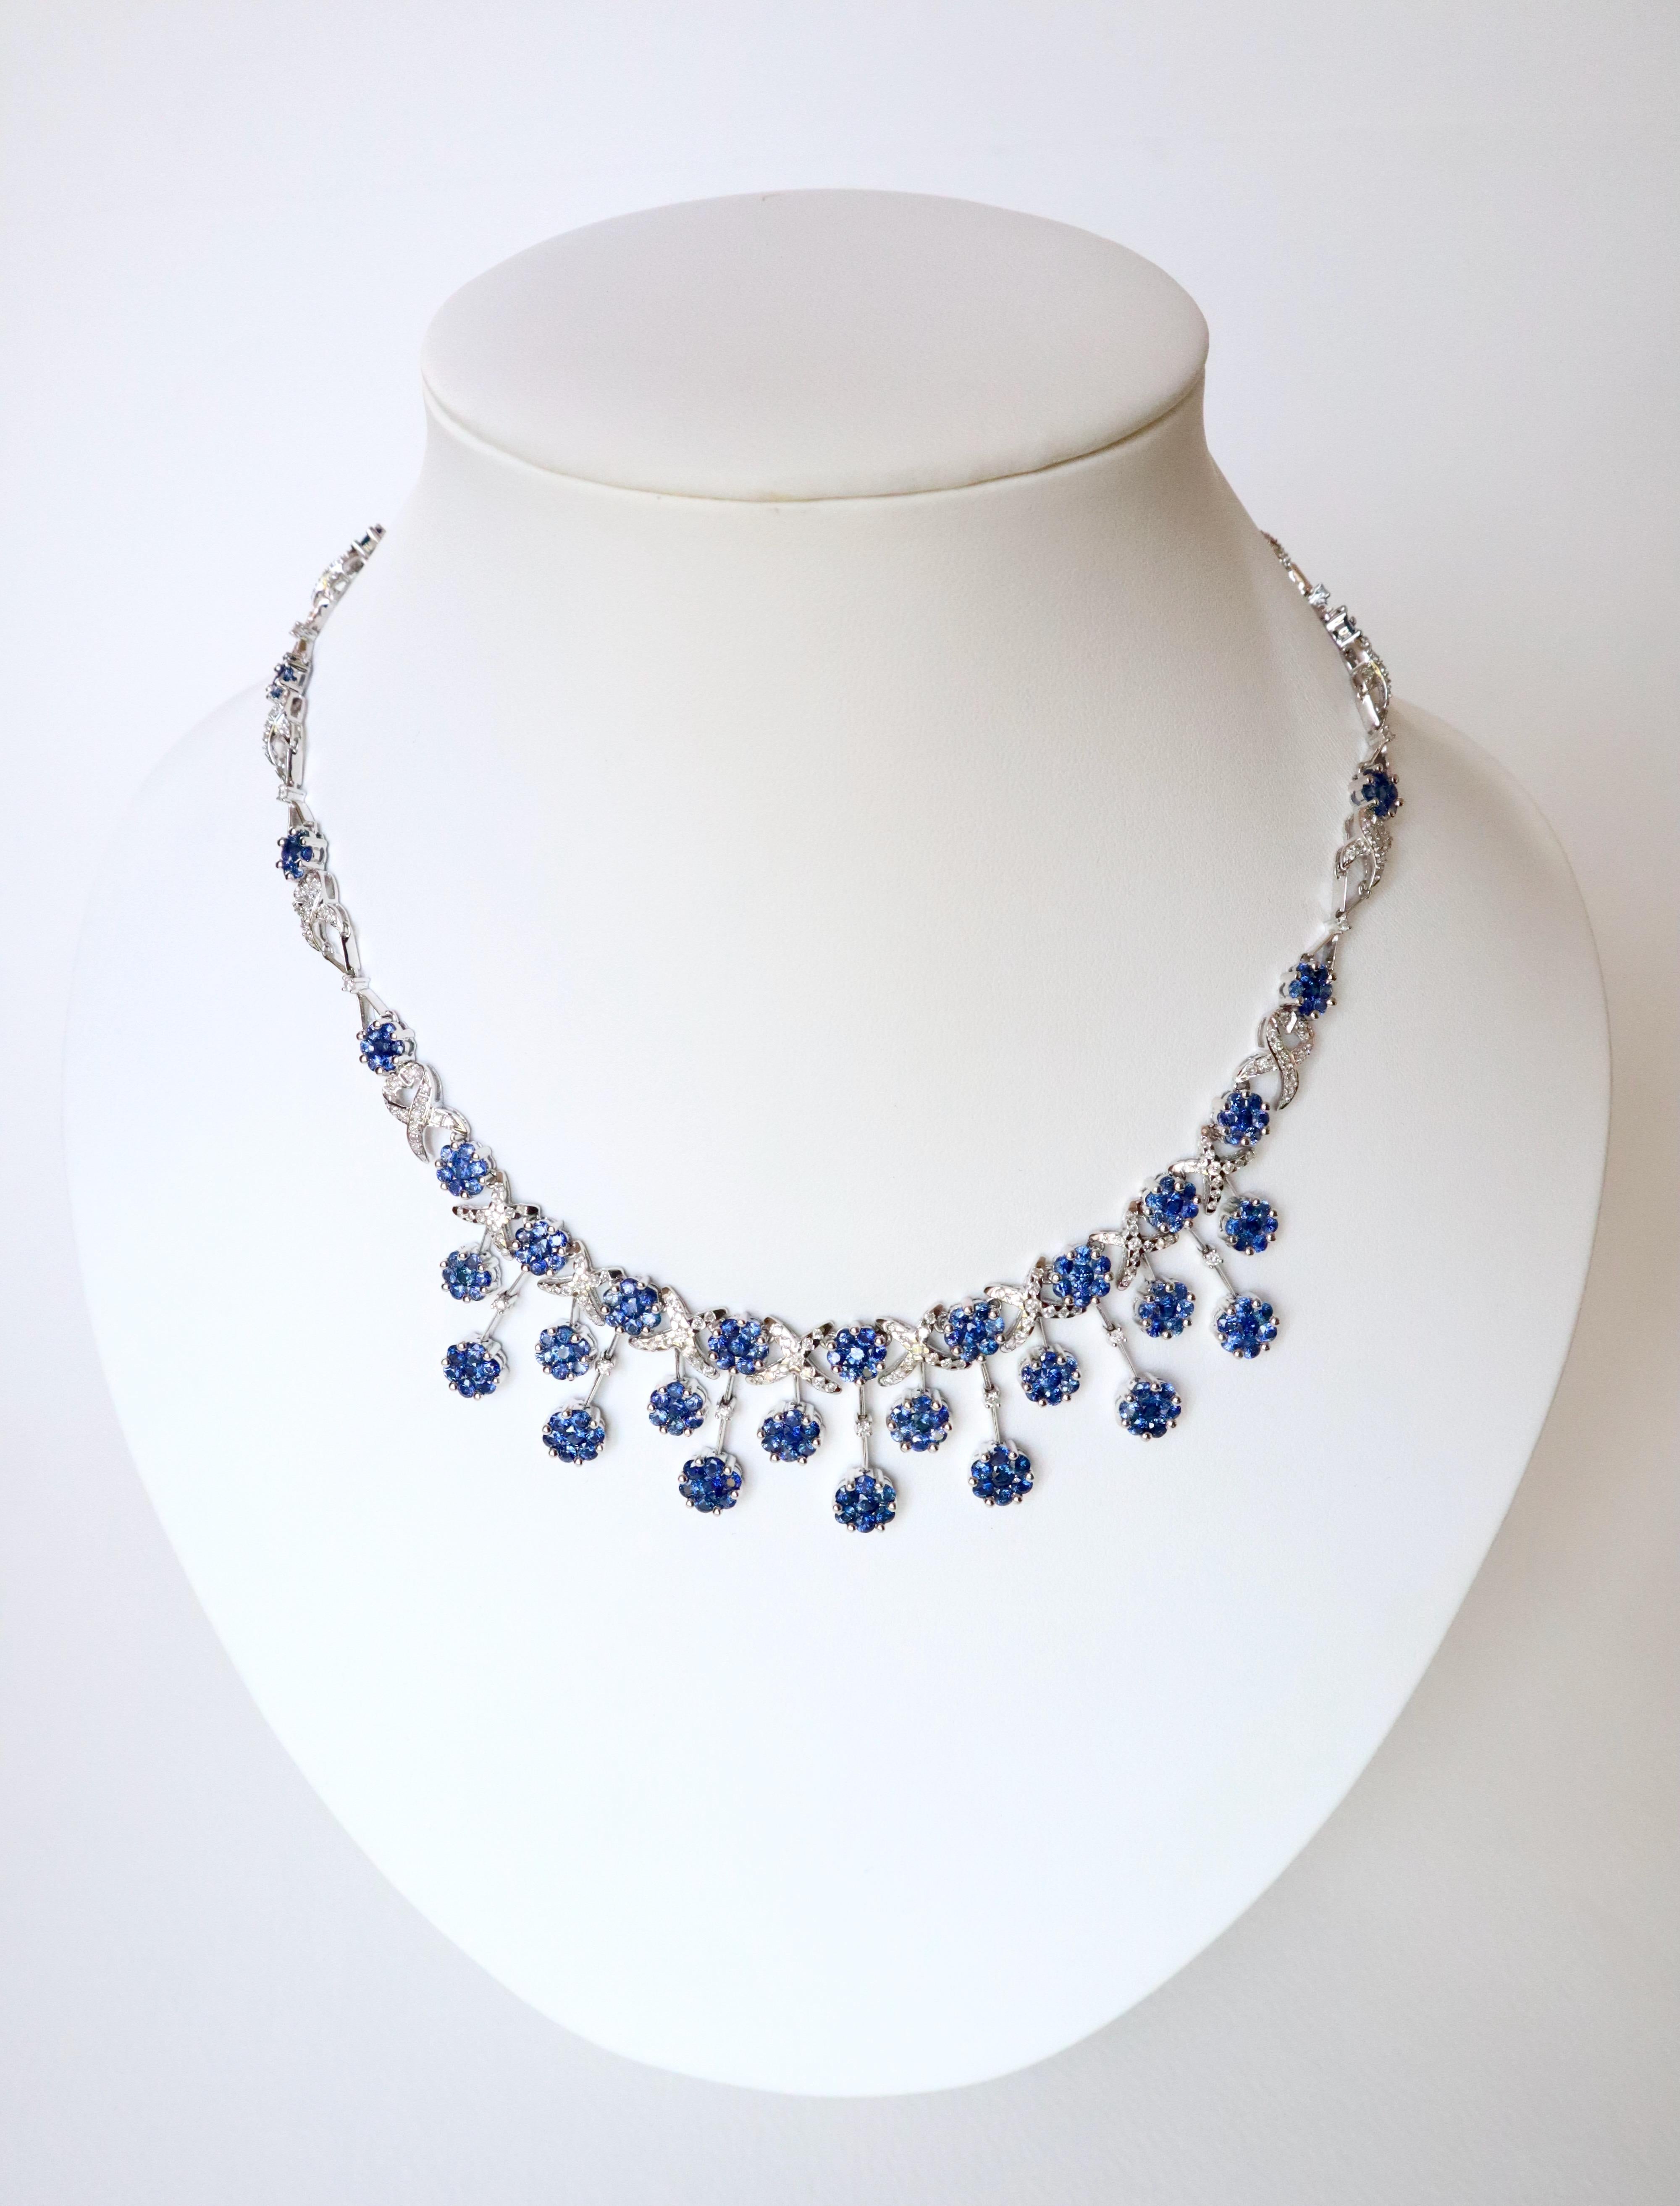 Drapery necklace in 18 carat white gold, sapphires and diamonds. It is composed of 21 floral motifs composed of 7 sapphires each held together by interlaced links paved with diamonds or by chains. The center of the necklace is made up of 15 floral